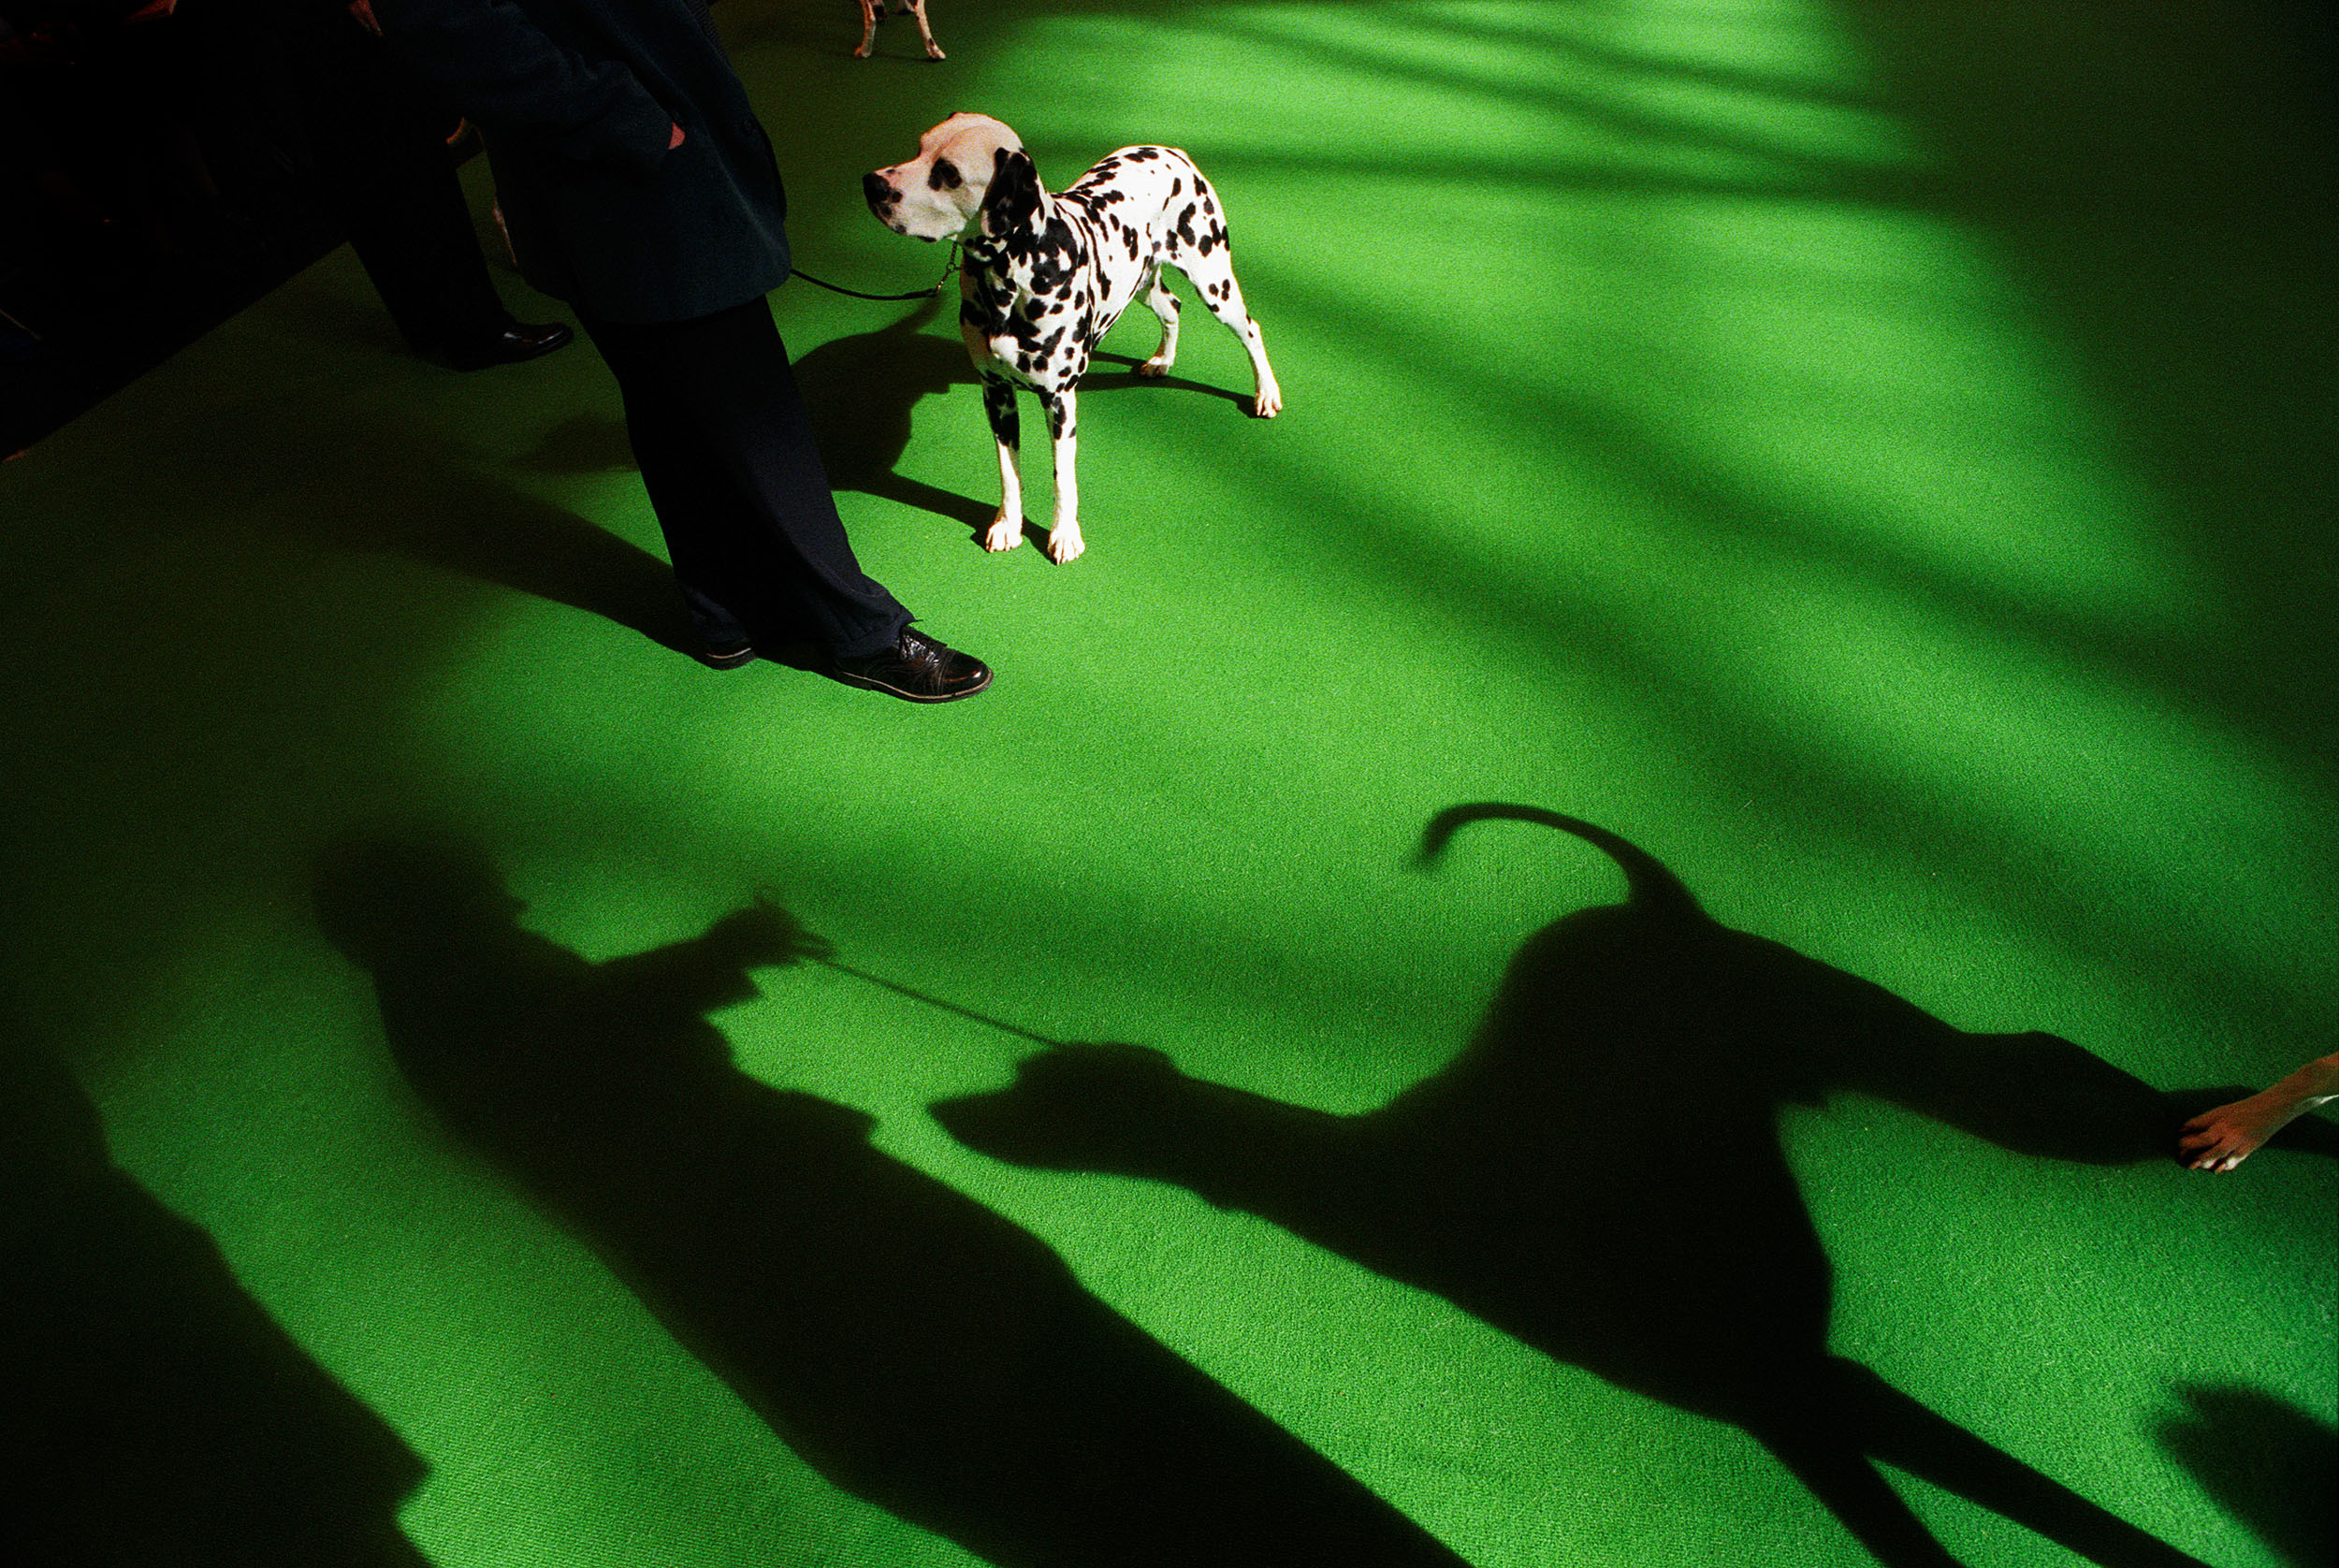  A shaft of sunlight casts shadows of dogs and owners on to the carpet of the judging ring at Crufts international dog show 